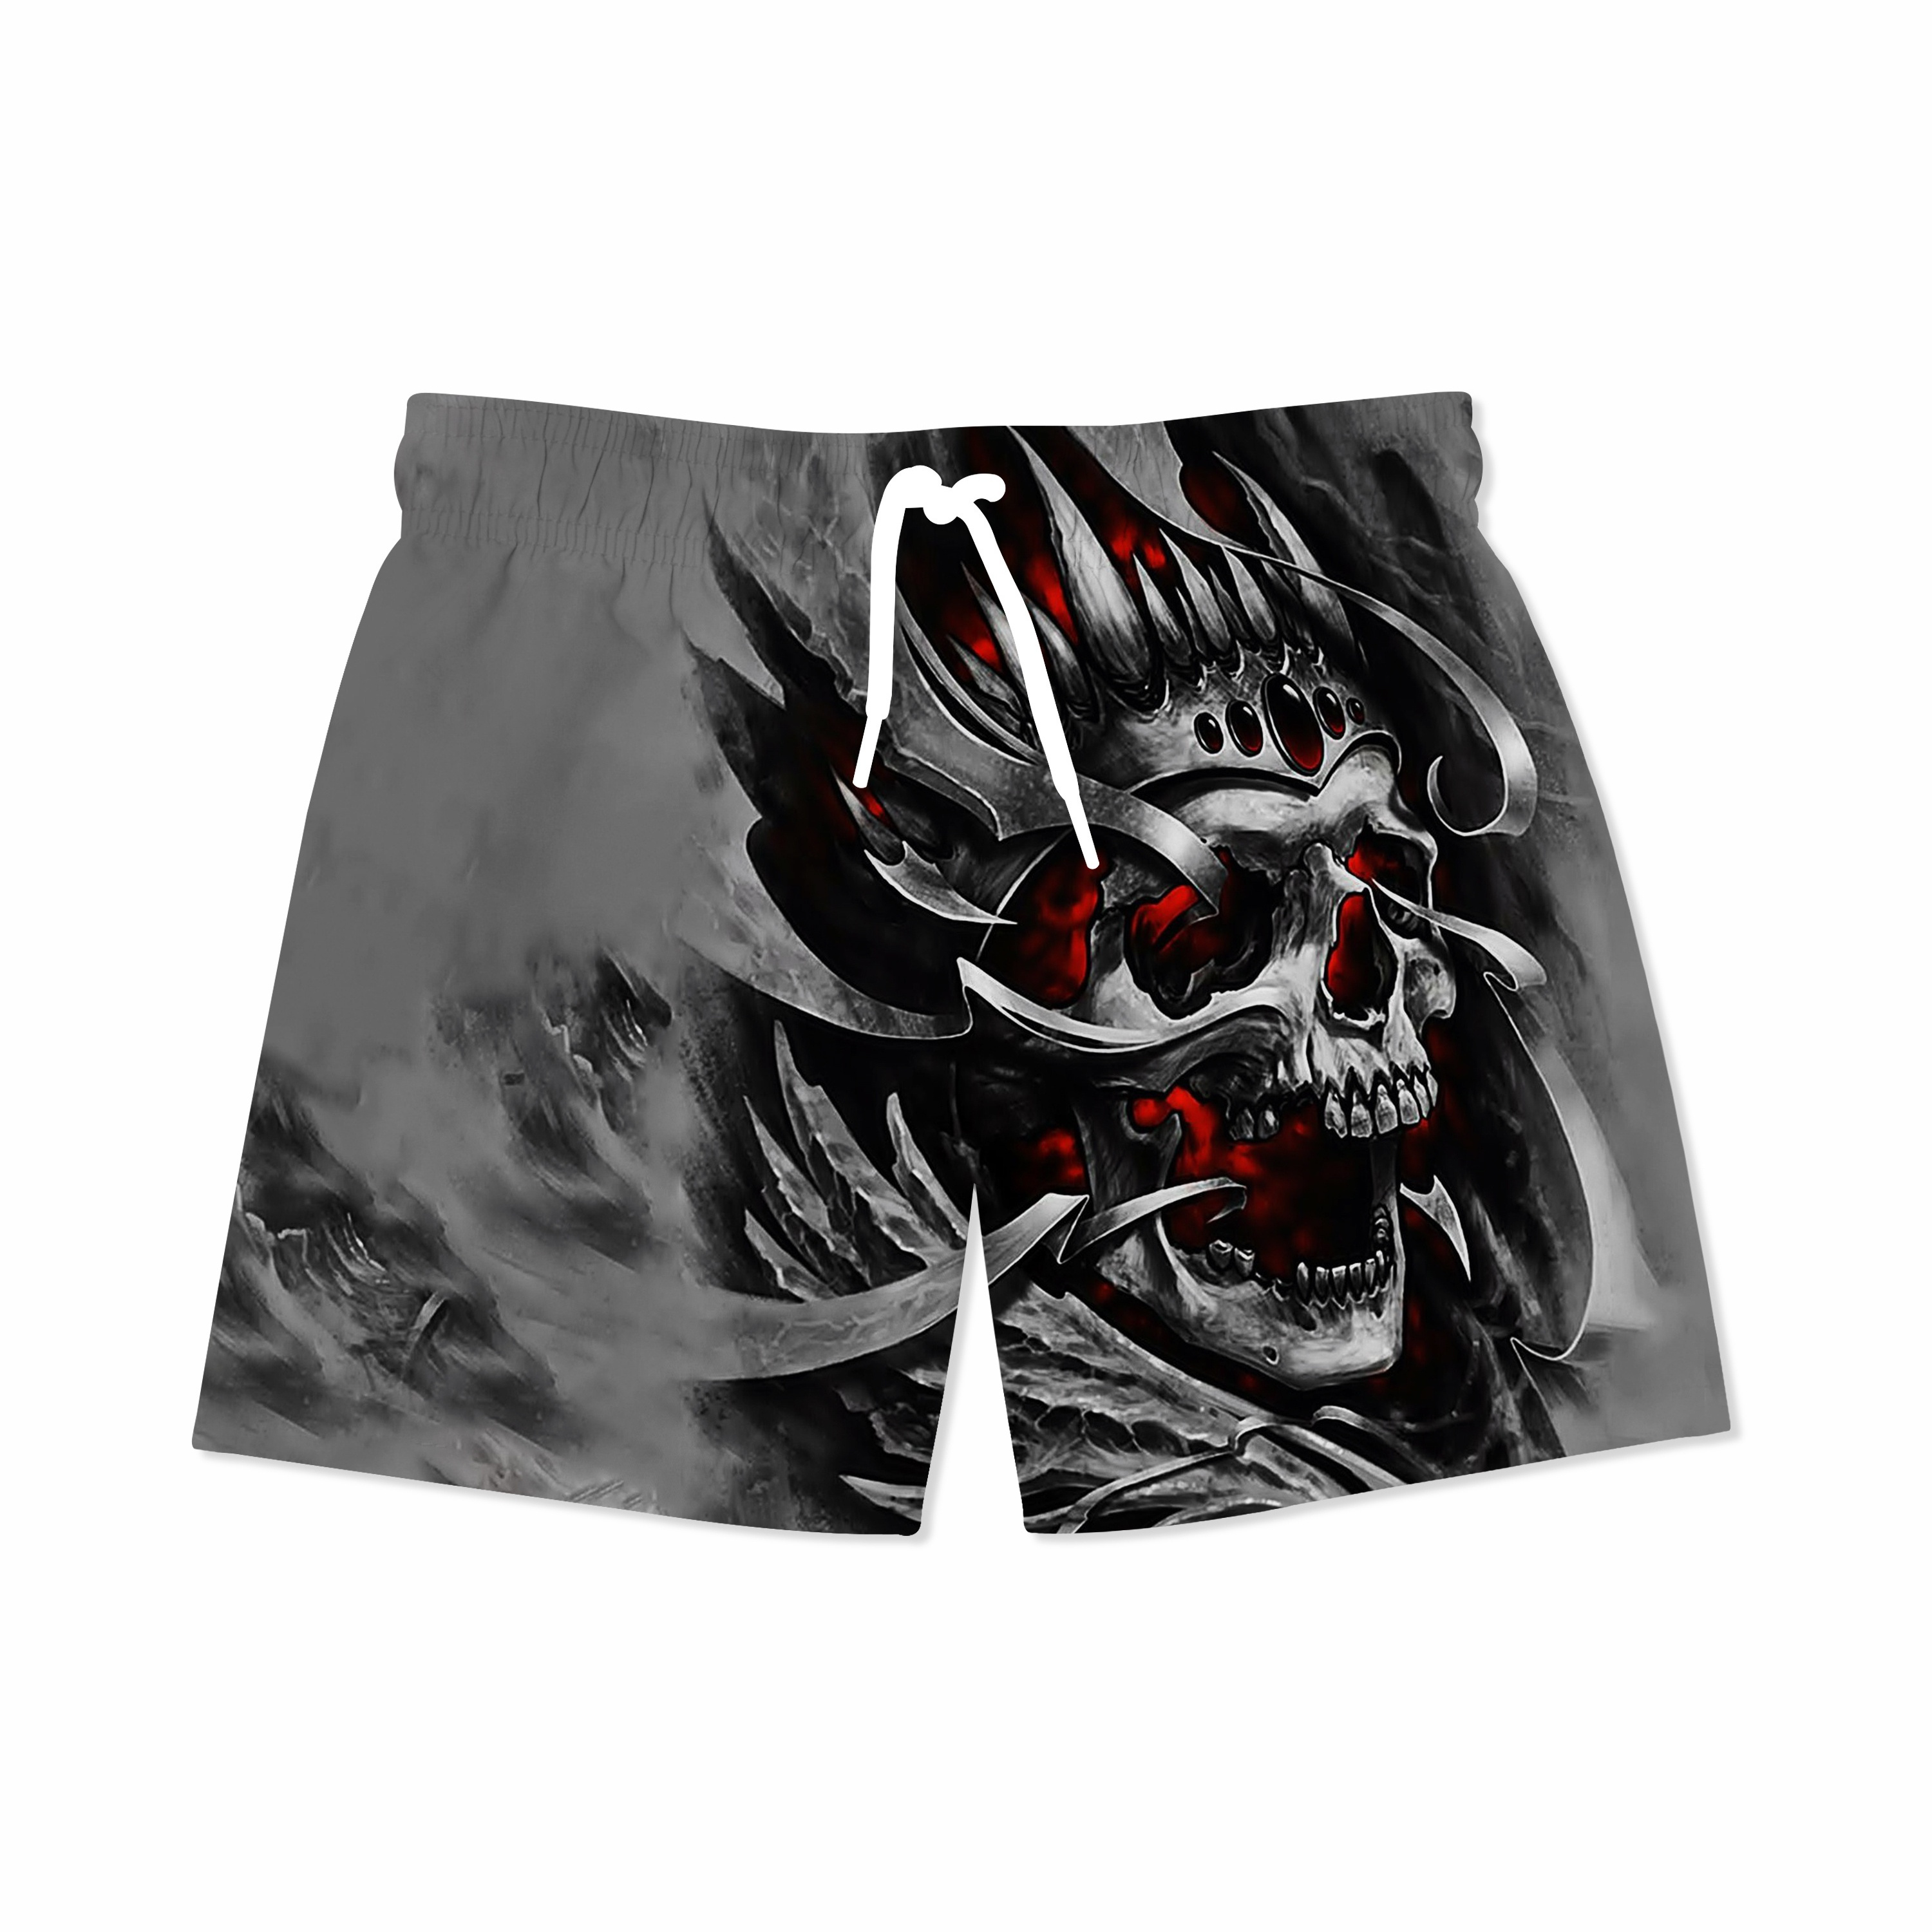 

1pc, Men's 3d Digital Metallic Style Skull Pattern Shorts With Drawstring And Pockets, Novel And Stylish Shorts For Summer Street Wear